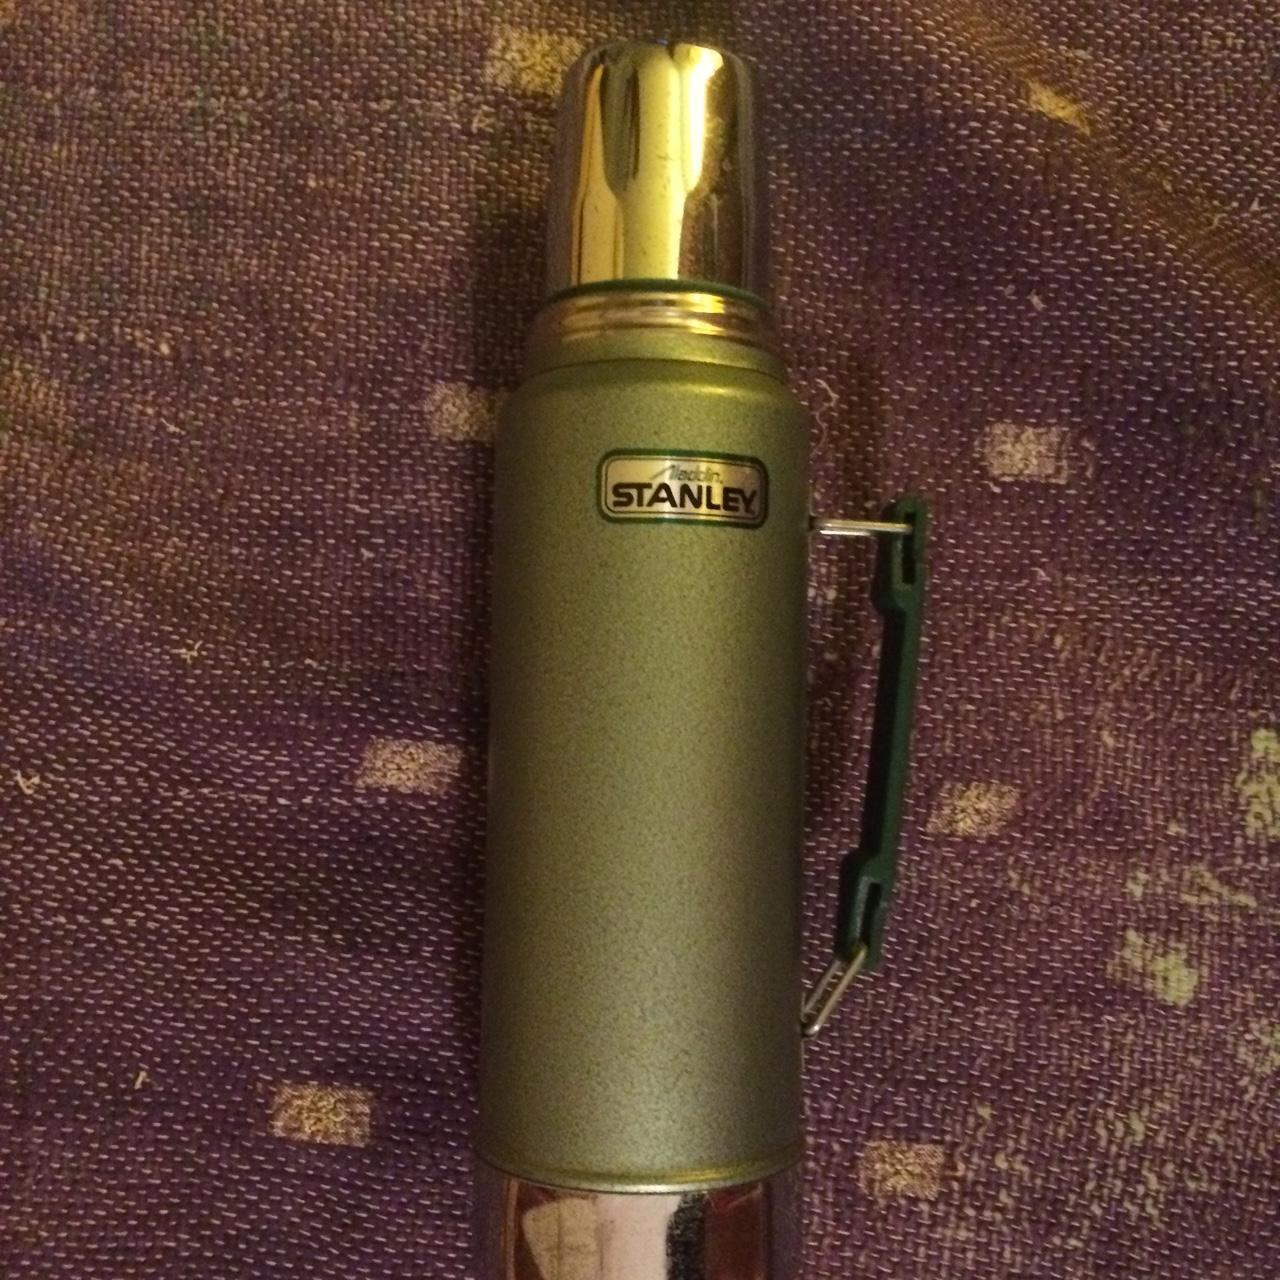 Vintage Stanley thermos Green Used condition, - Depop